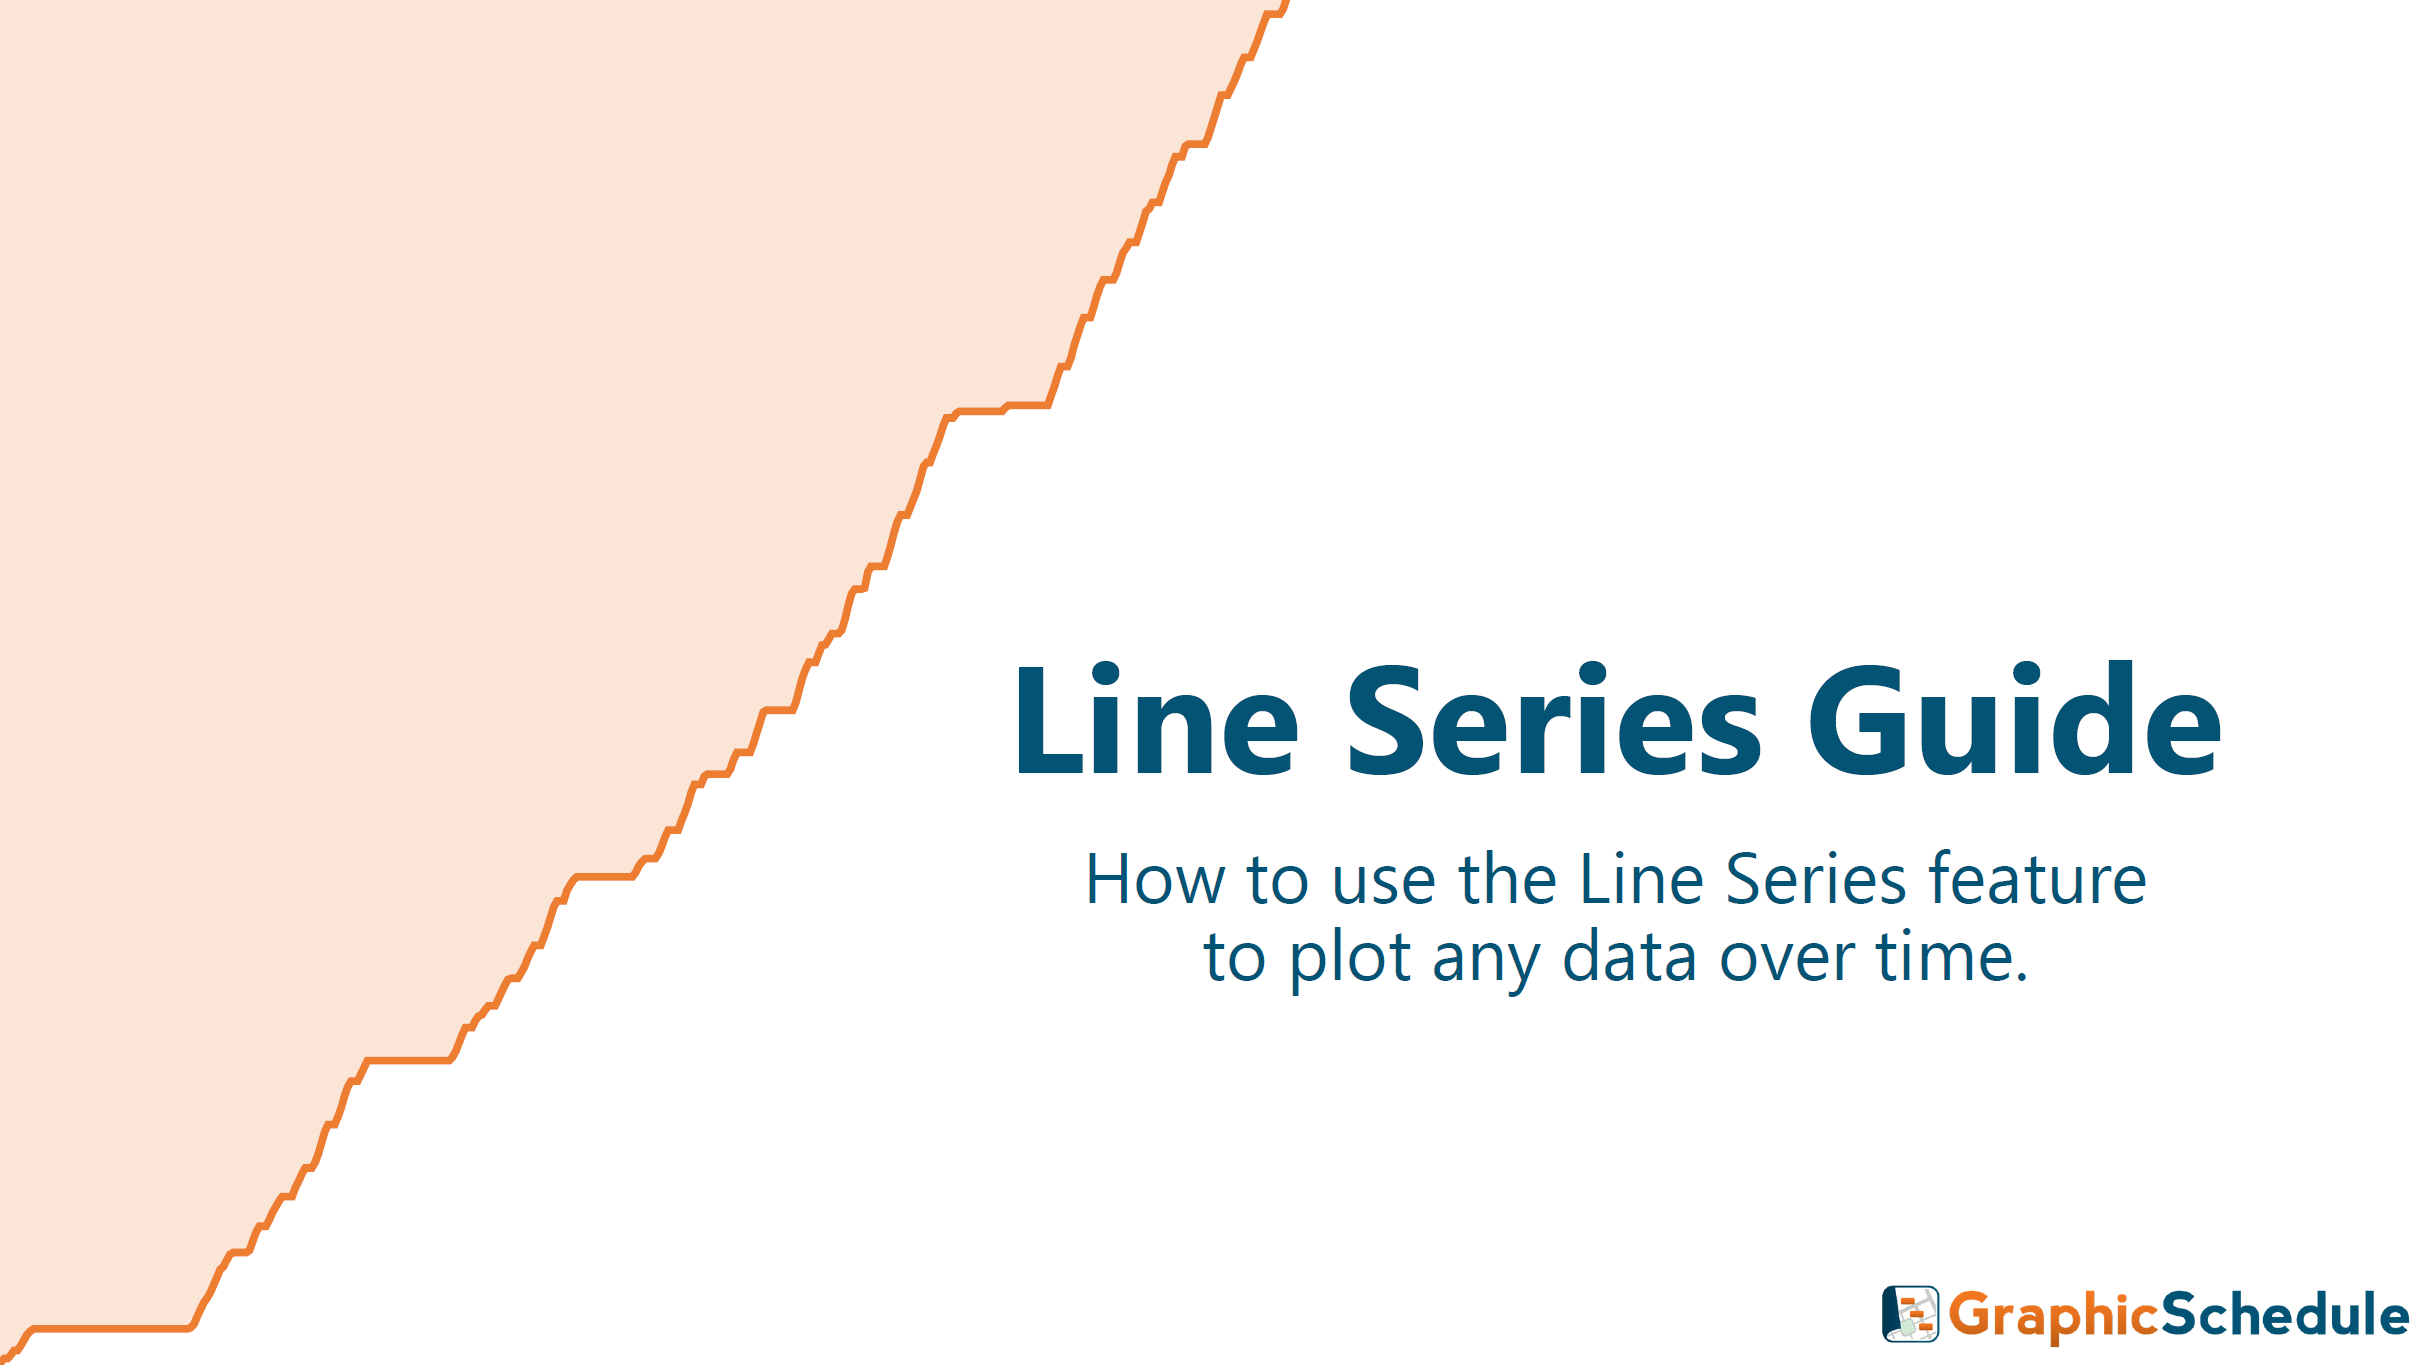 How to use the Line Series feature to plot any data over time.